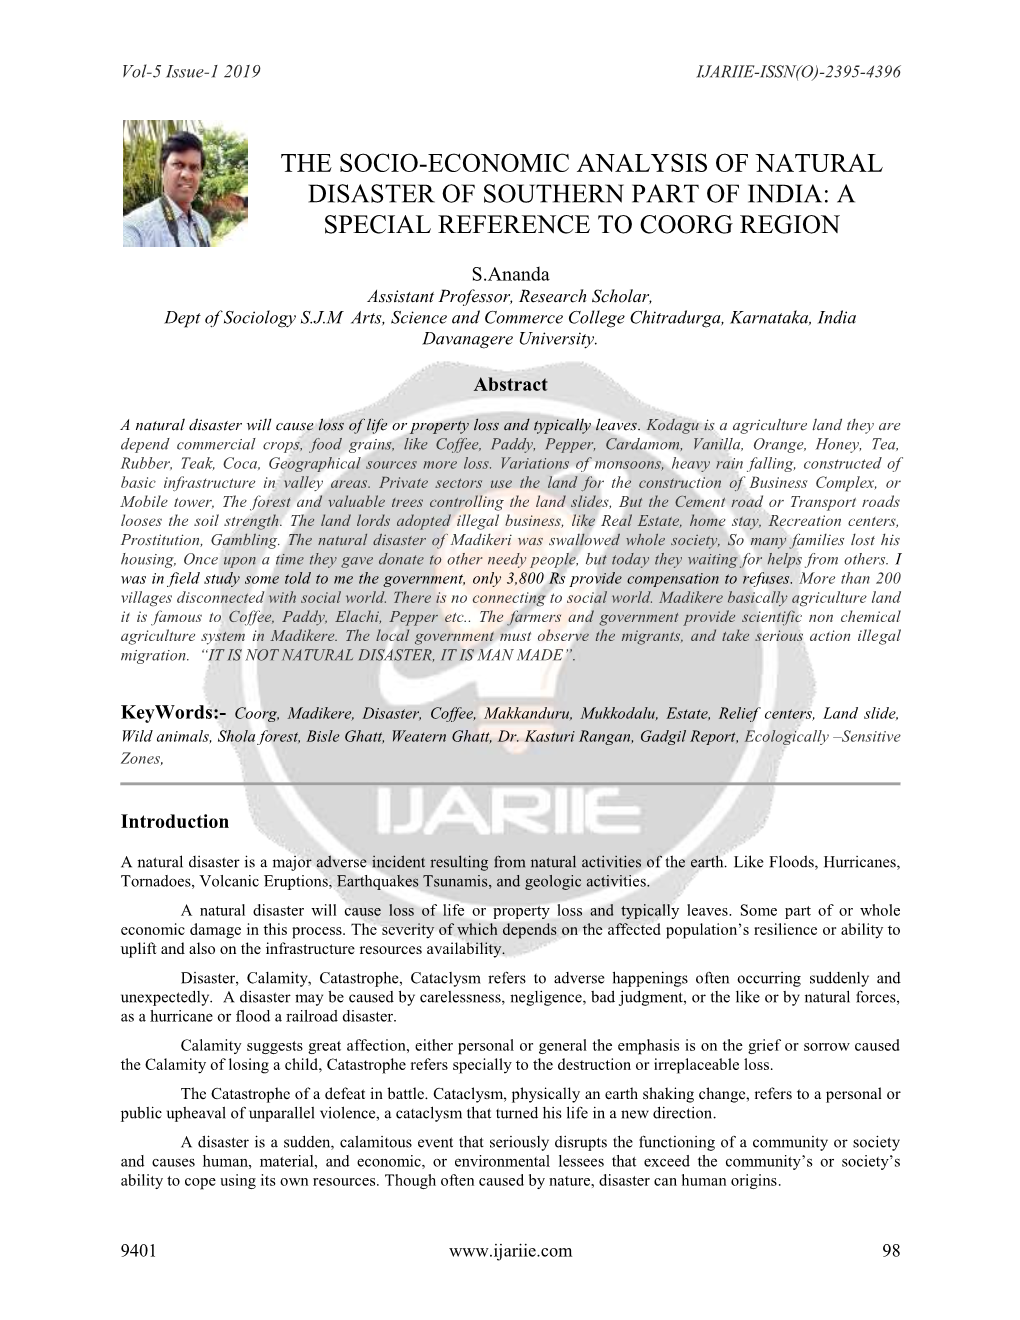 The Socio-Economic Analysis of Natural Disaster of Southern Part of India: a Special Reference to Coorg Region